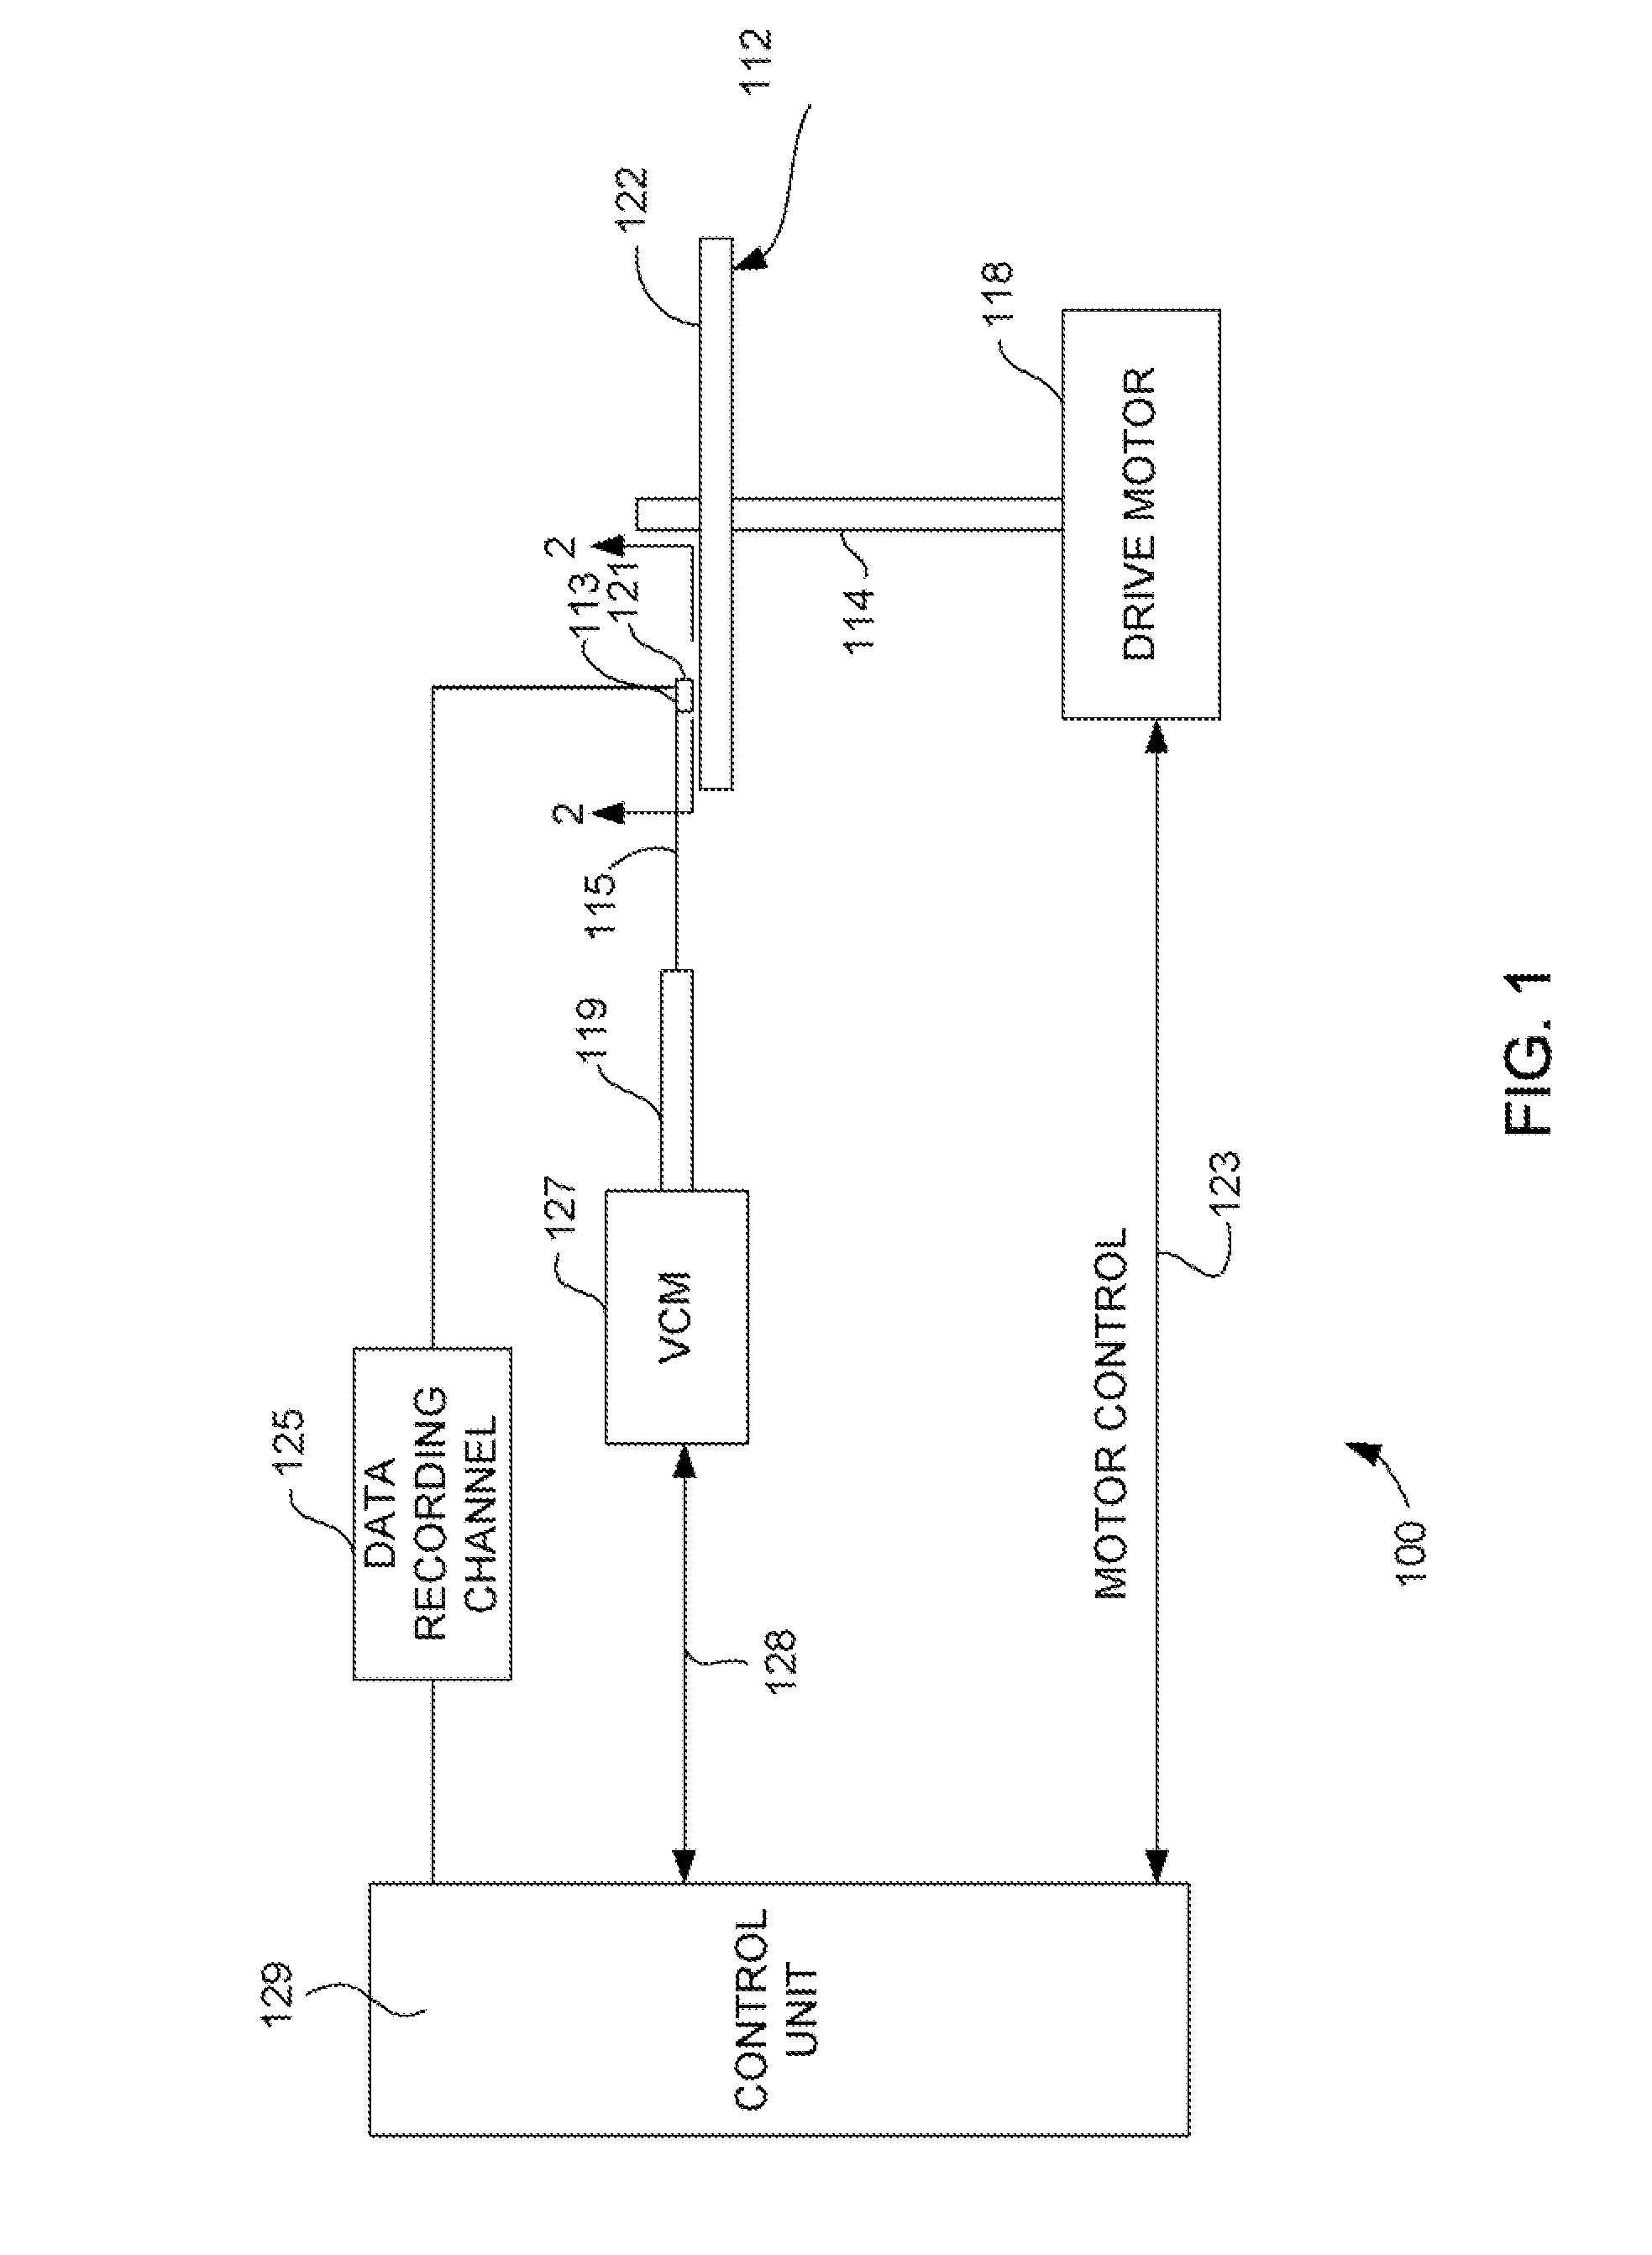 Current-perpendicular-to-plane sensor with dual keeper layers